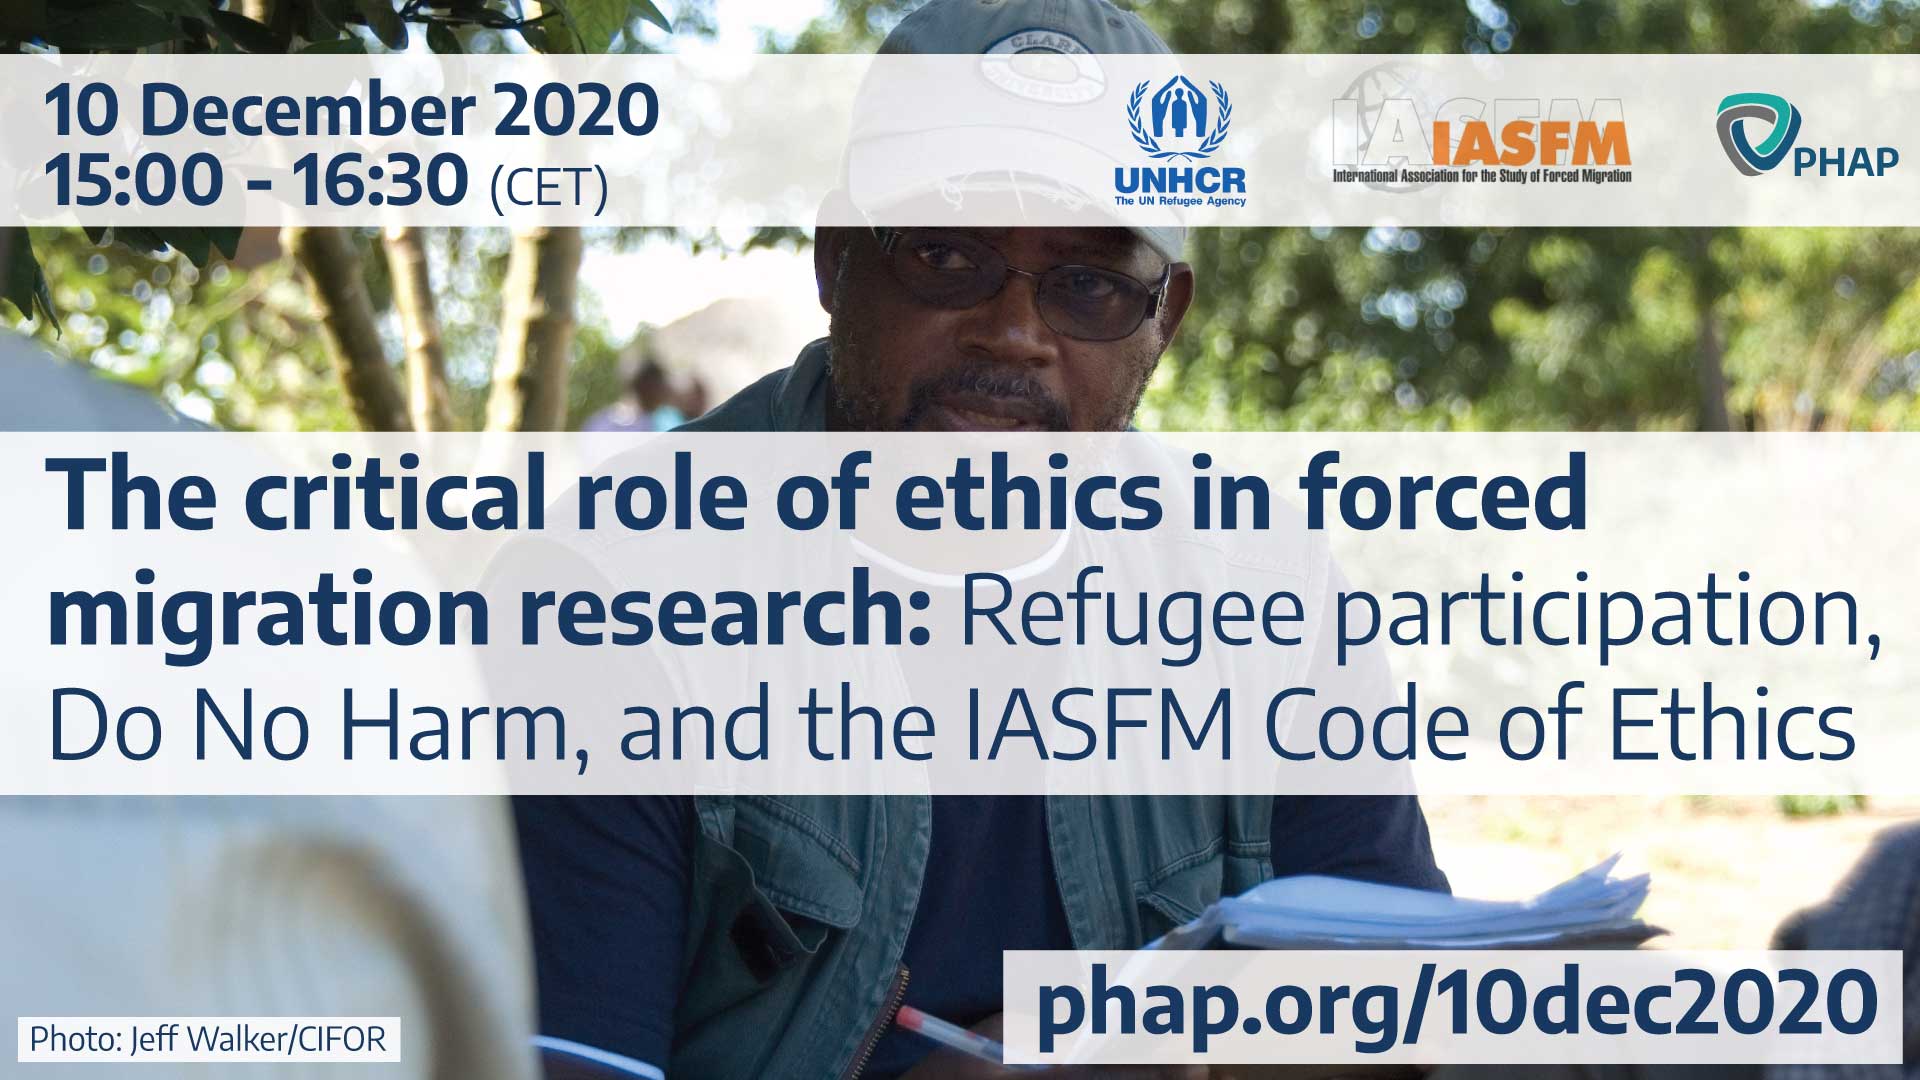 Banner for The critical role of ethics in forced migration research: Refugee participation, Do No Harm, and the IASFM Code of Ethics